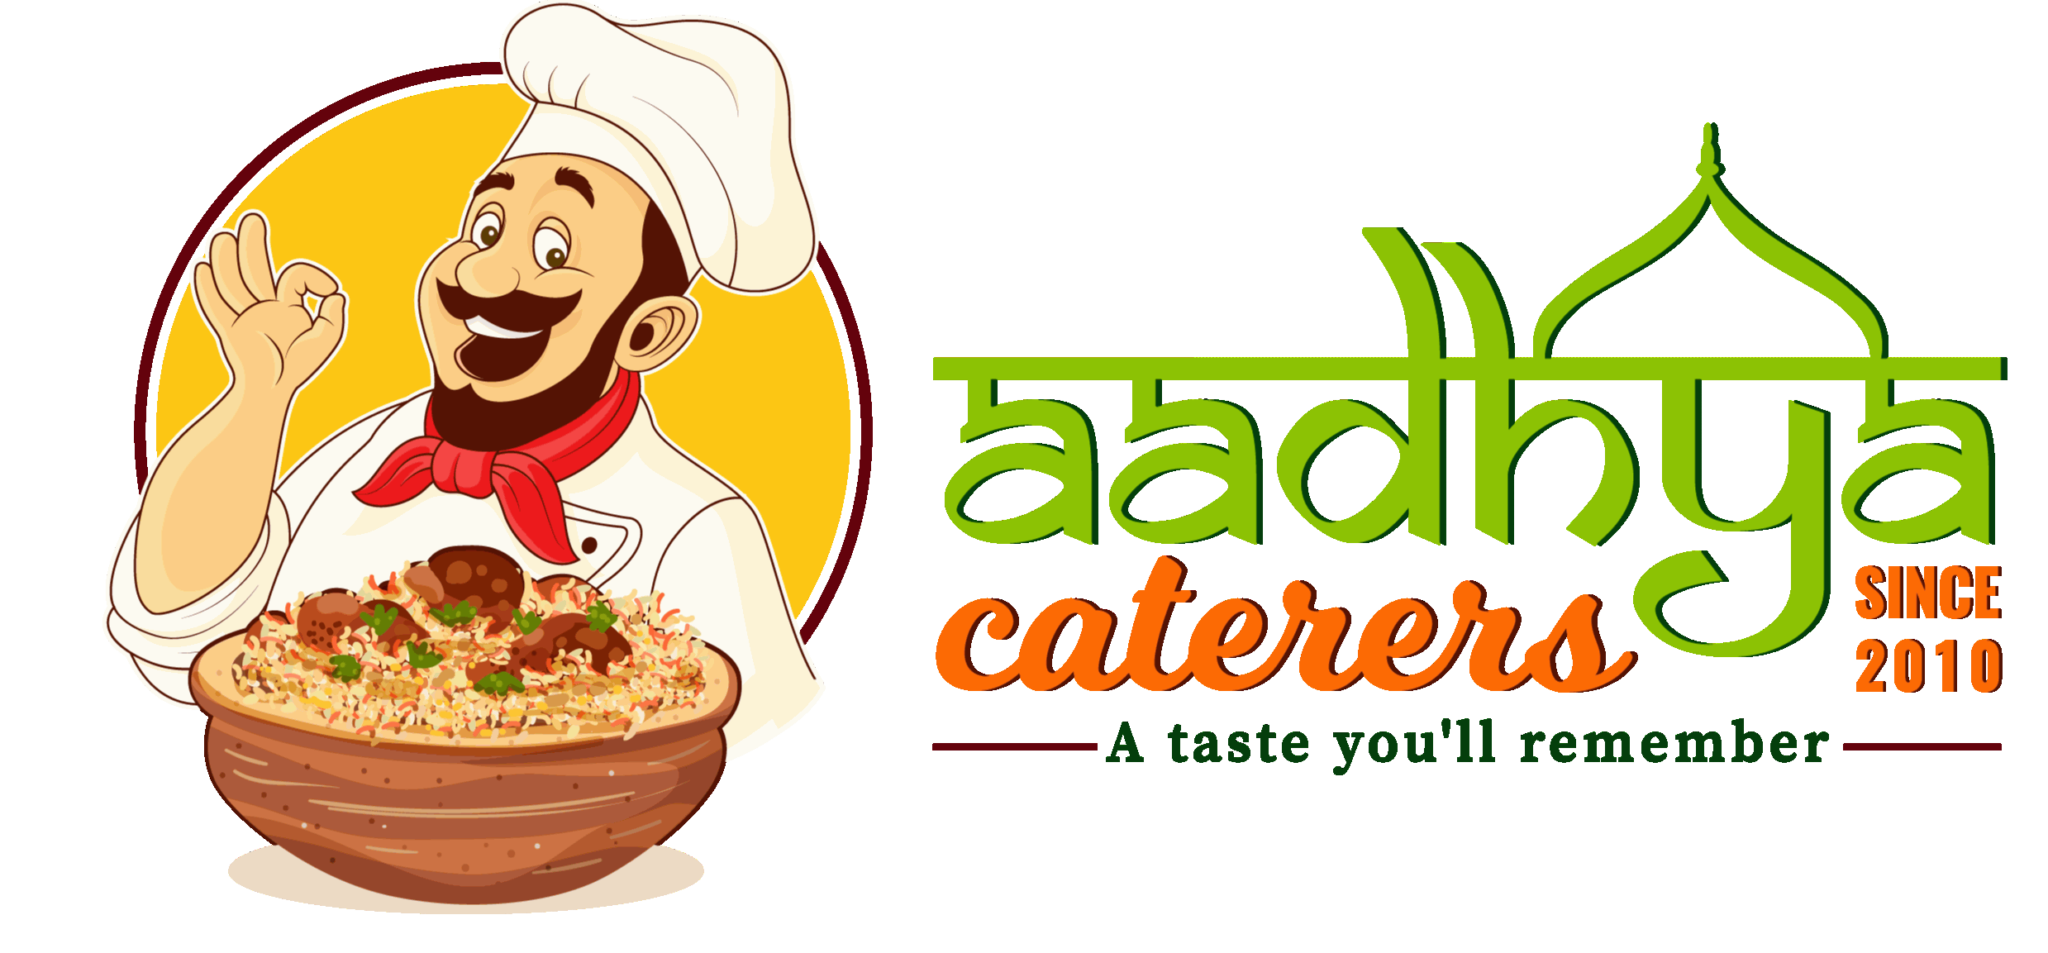 bestcaterers